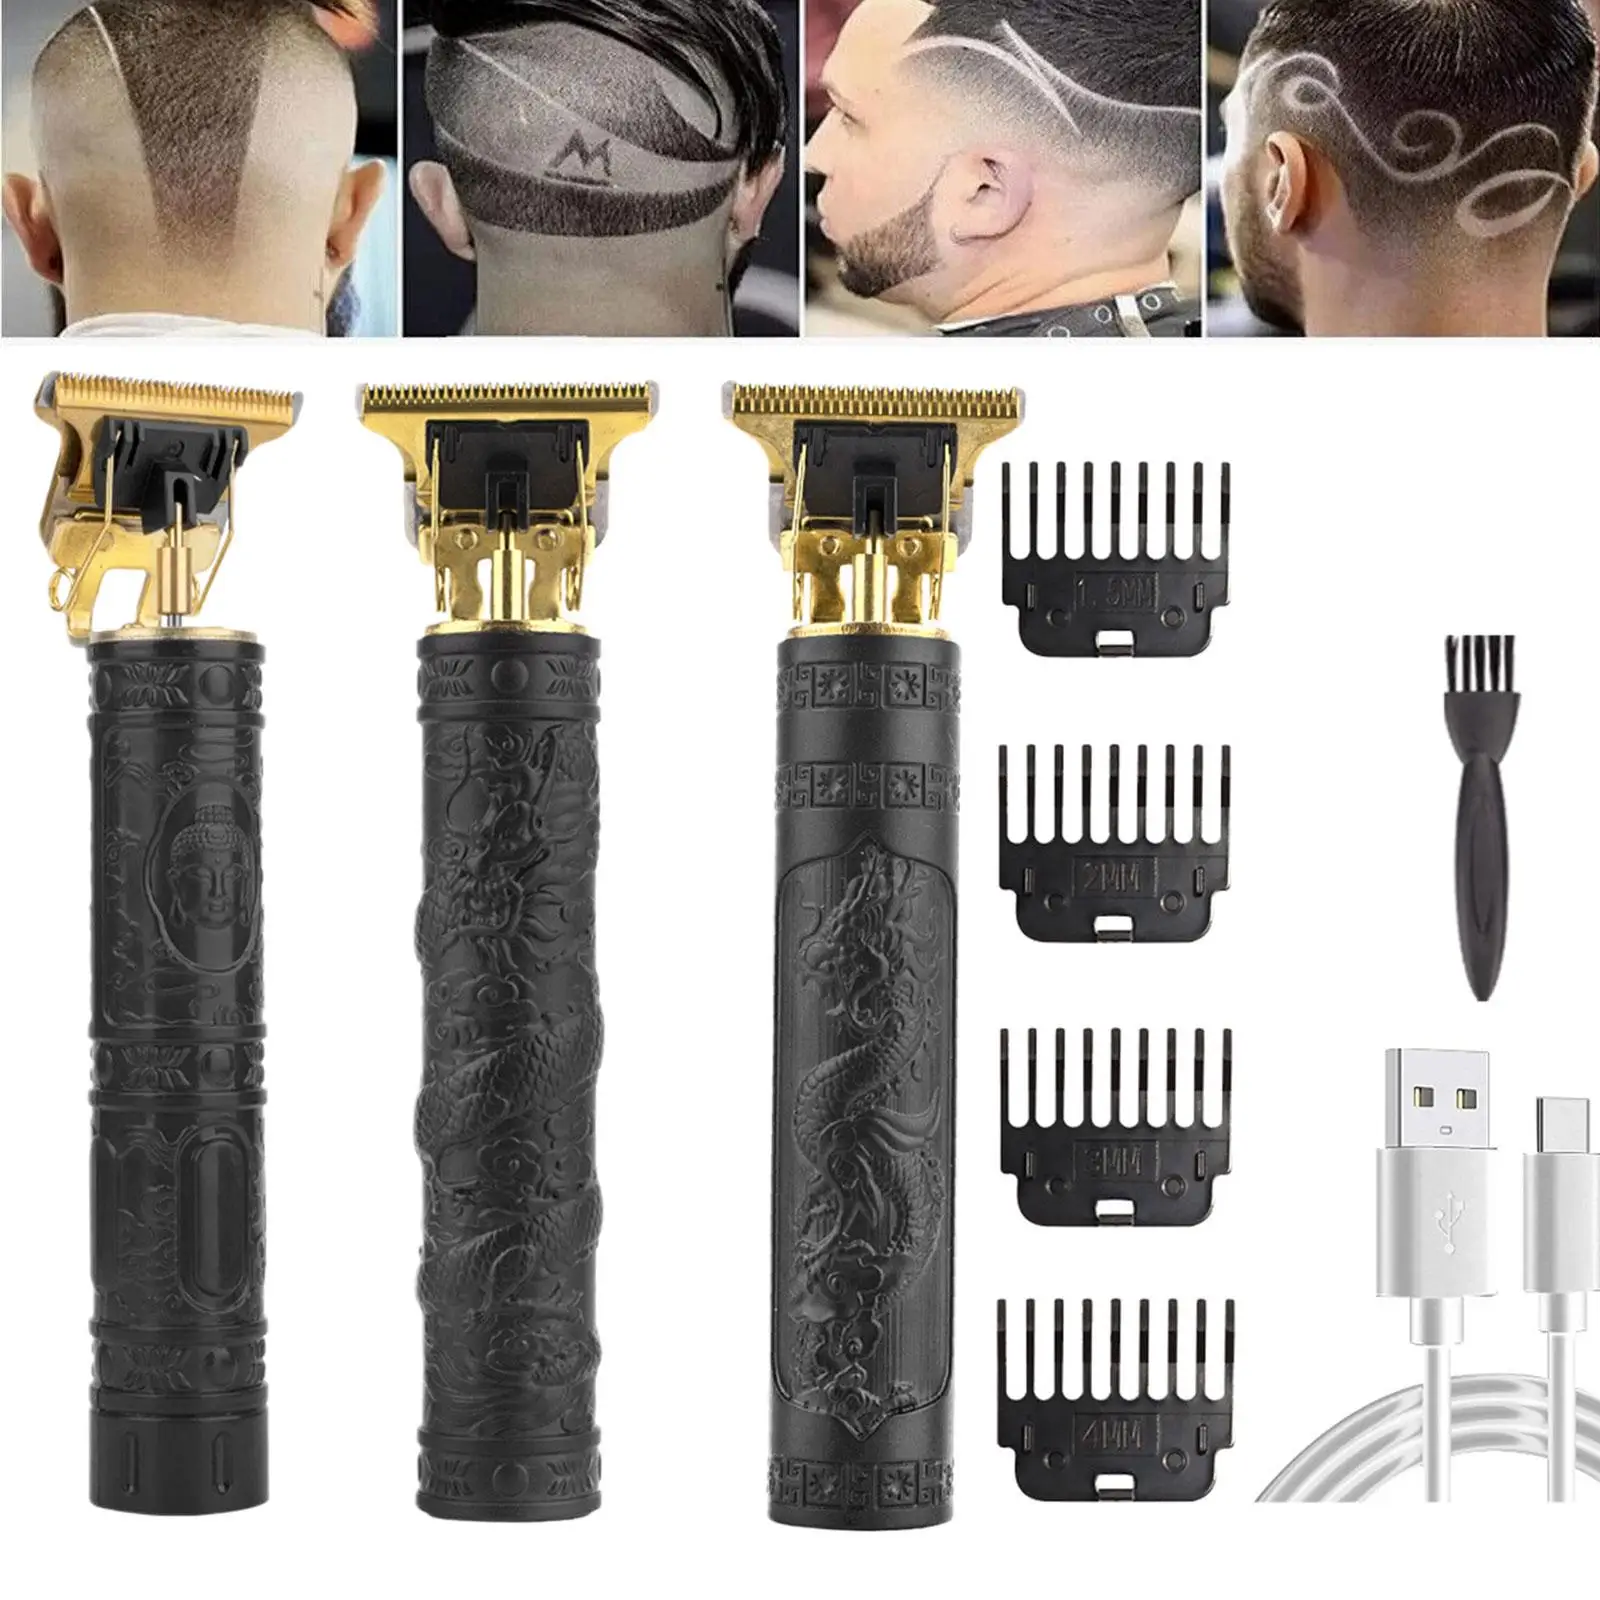 Professional T9 Electric Hair Cordless Hair Trimmer Machine Shaver Beard images - 6